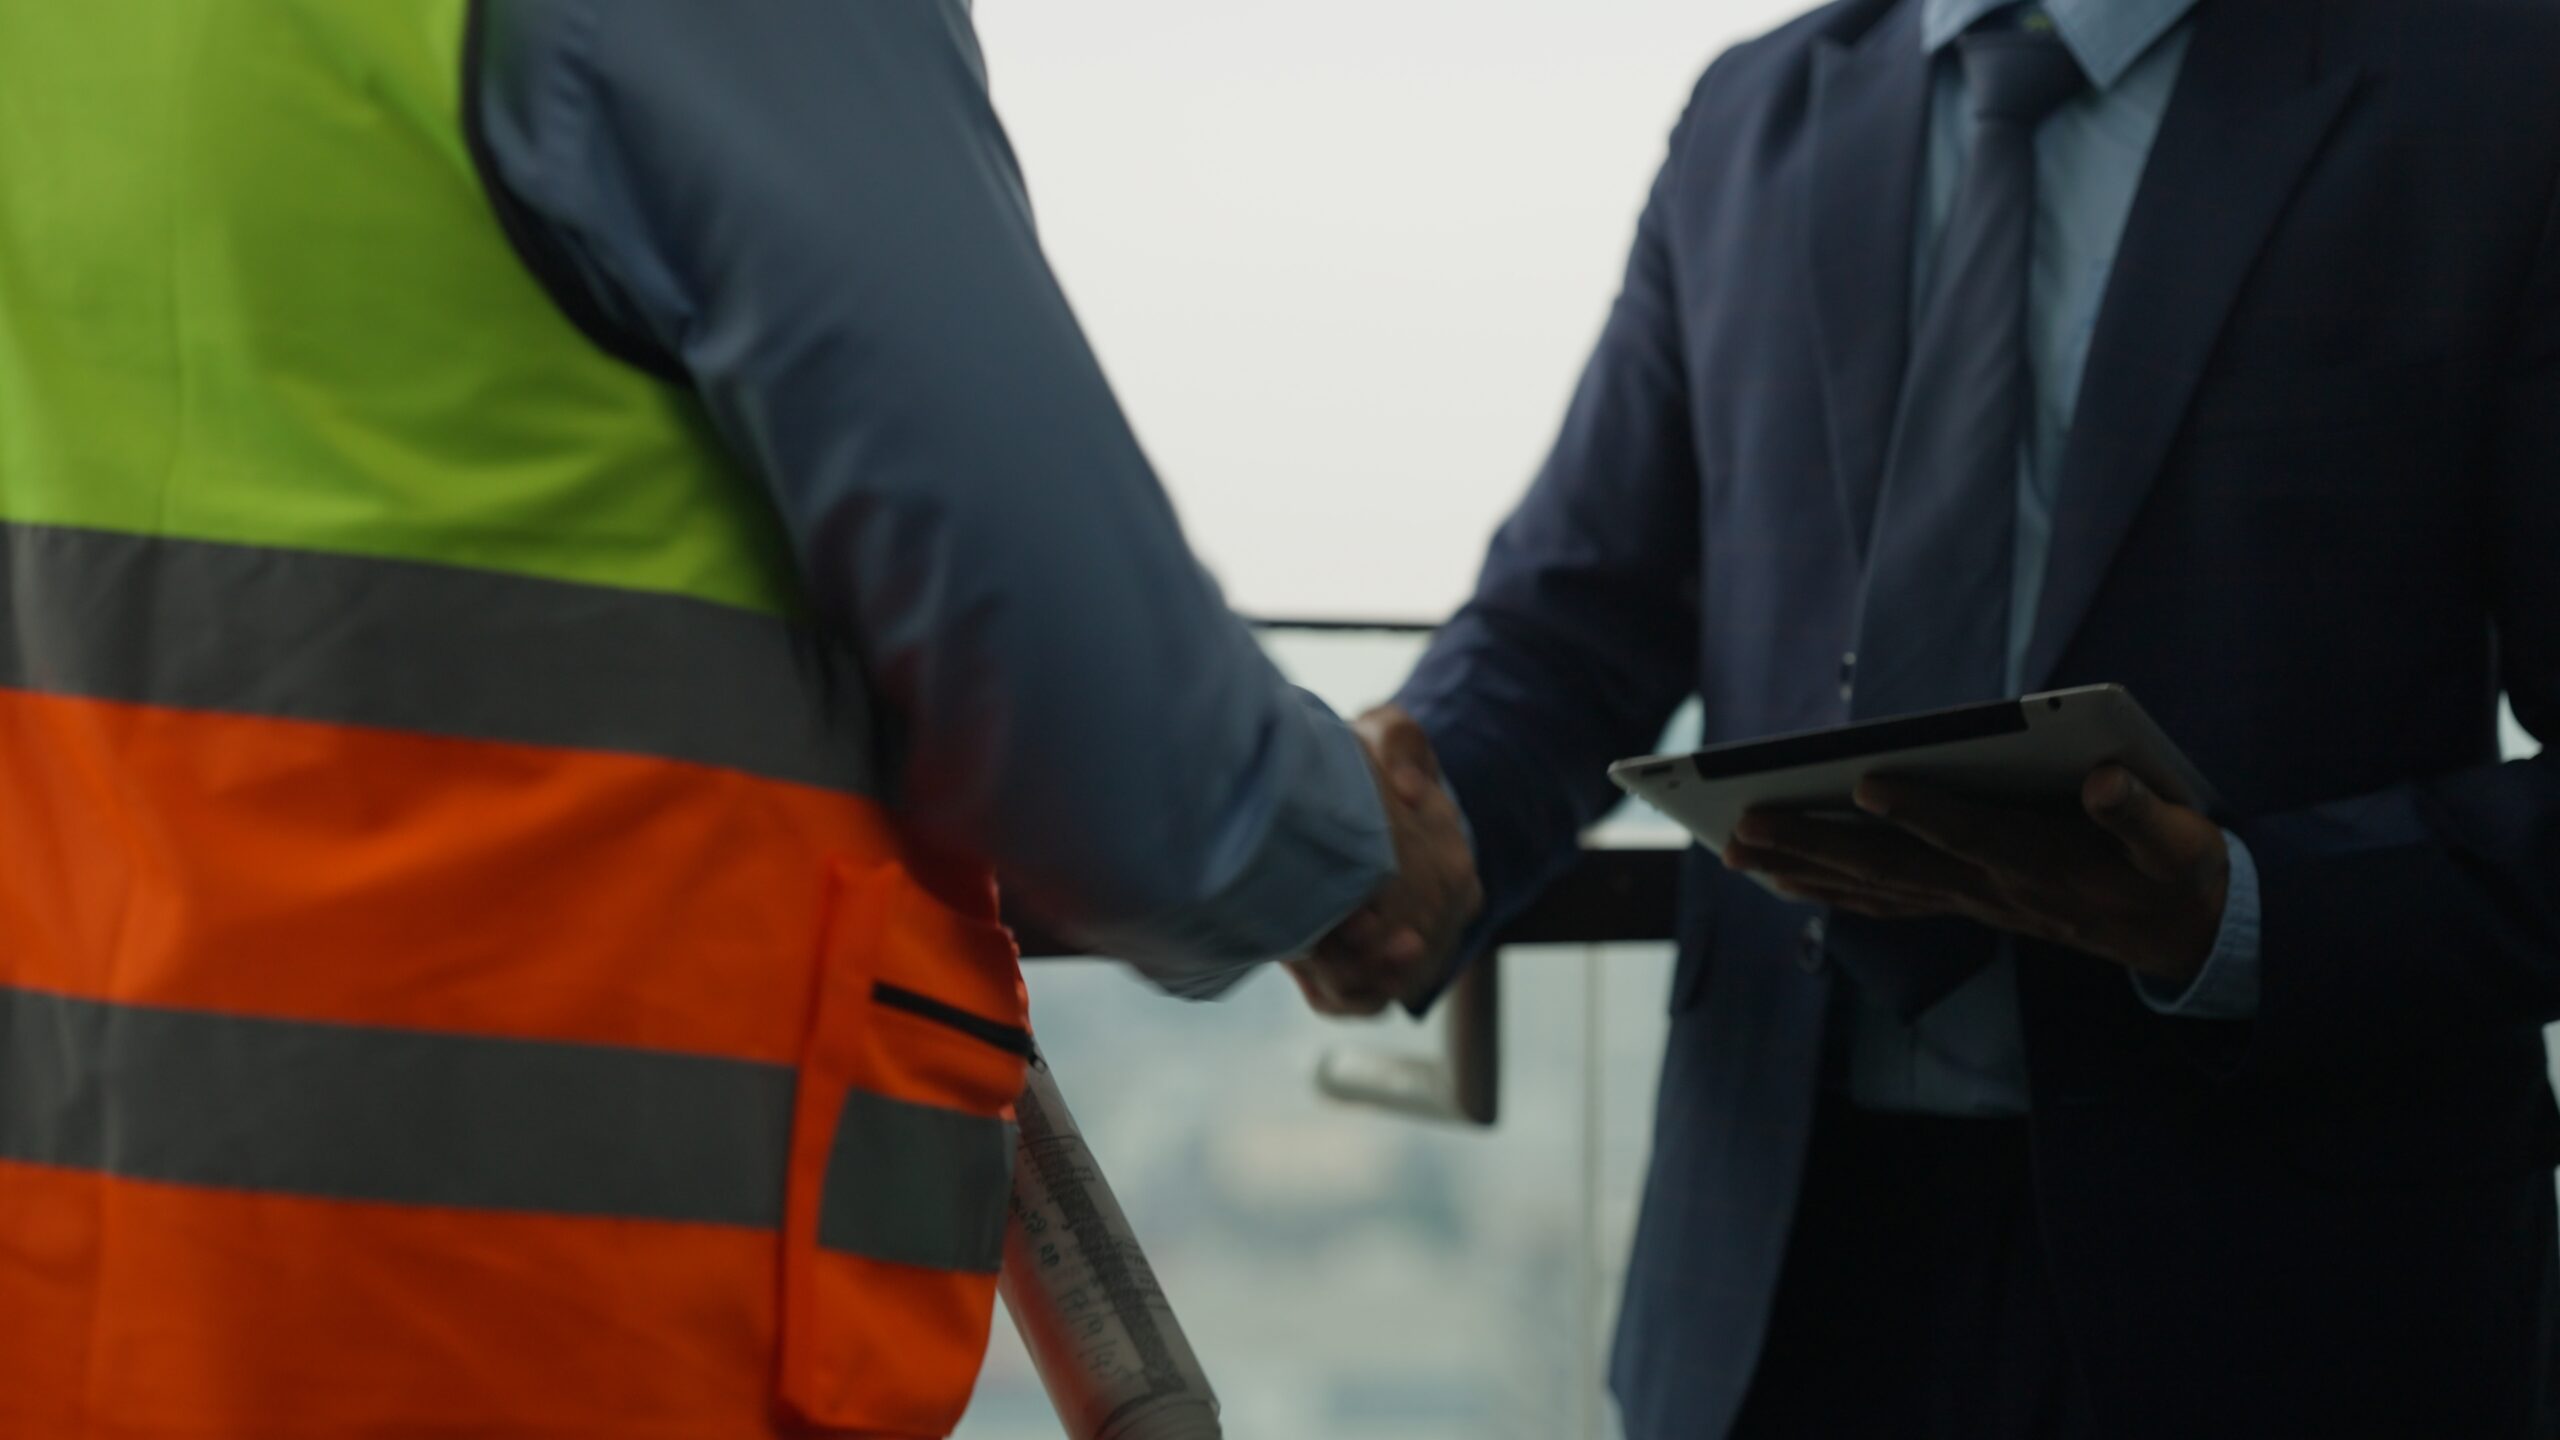 Construction worker shaking hands with a business person